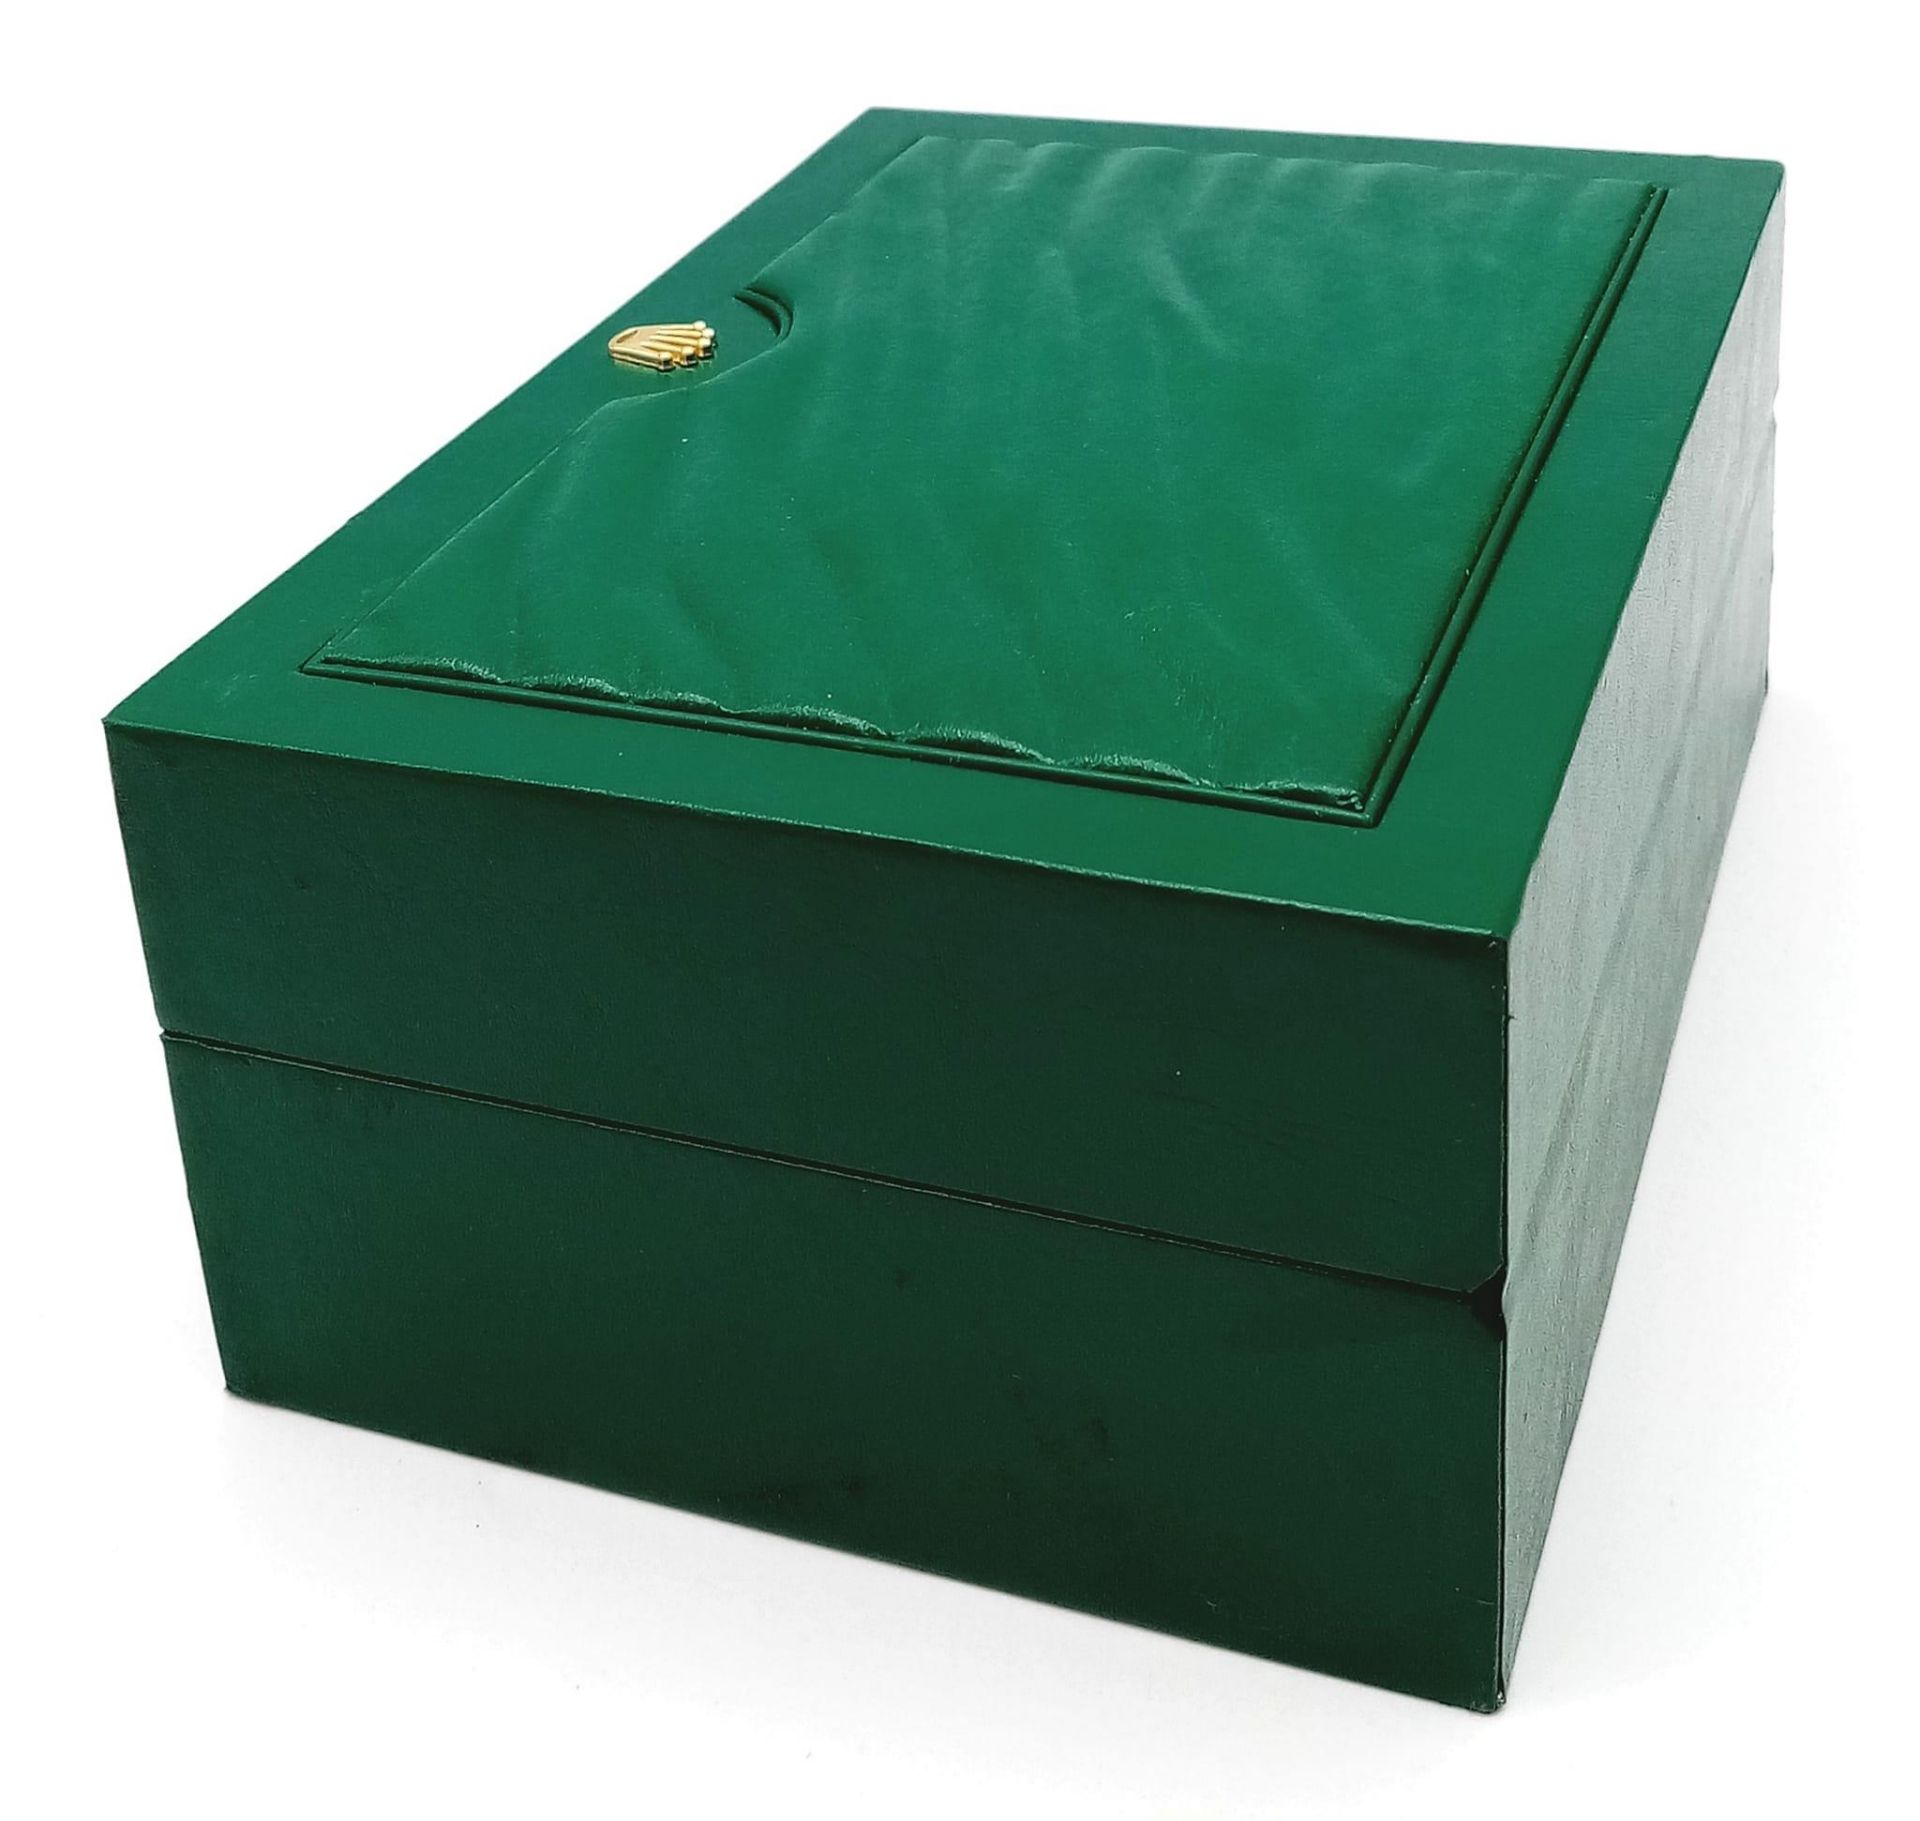 A Rolex Watch Case. Green ruffled exterior. Single watch space interior. 18cm x 13cm - Image 9 of 13